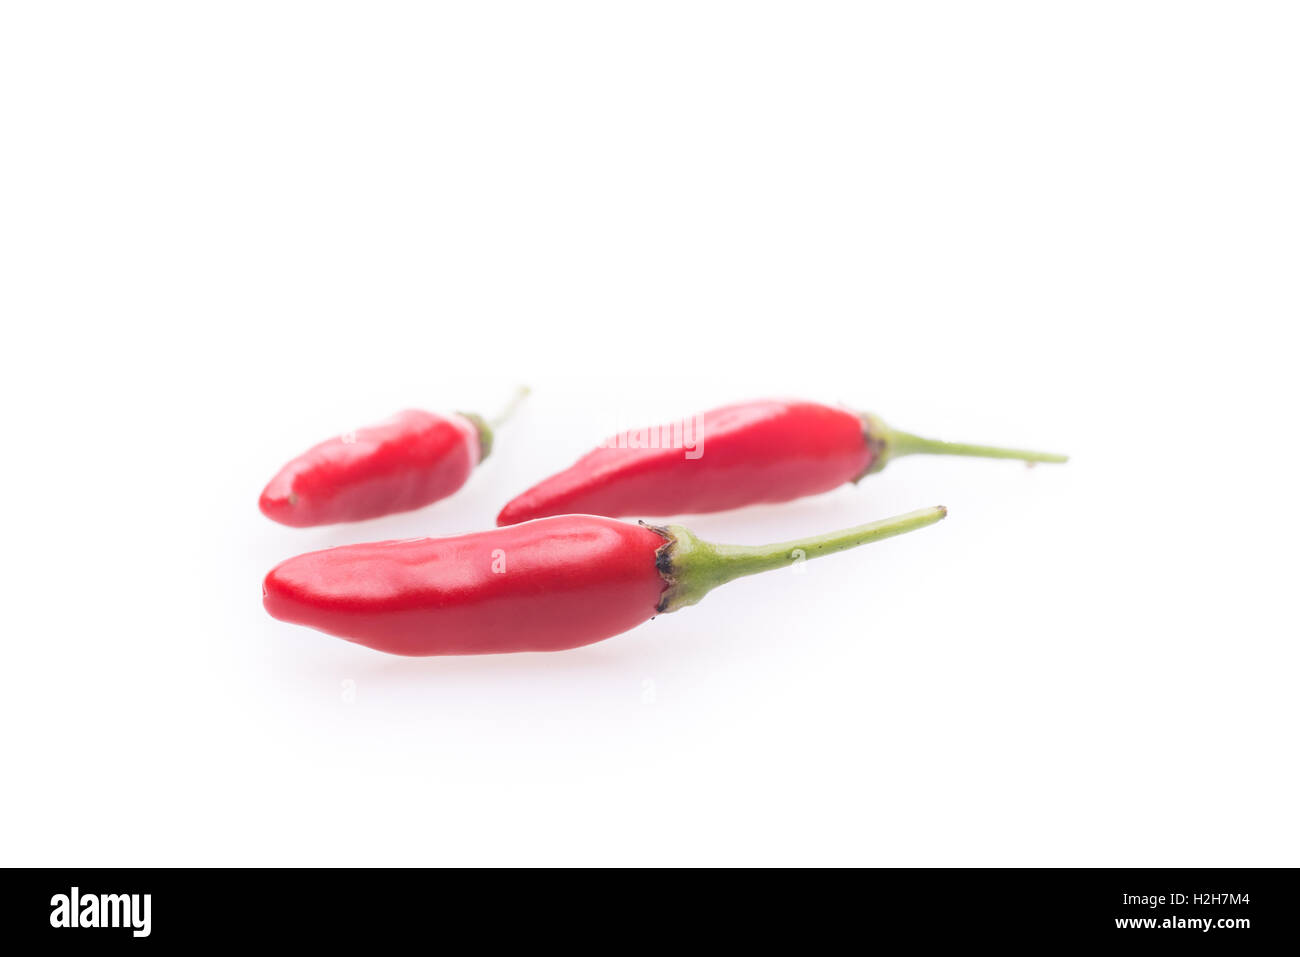 Spicy hot chili peppers on white background Stock Photo